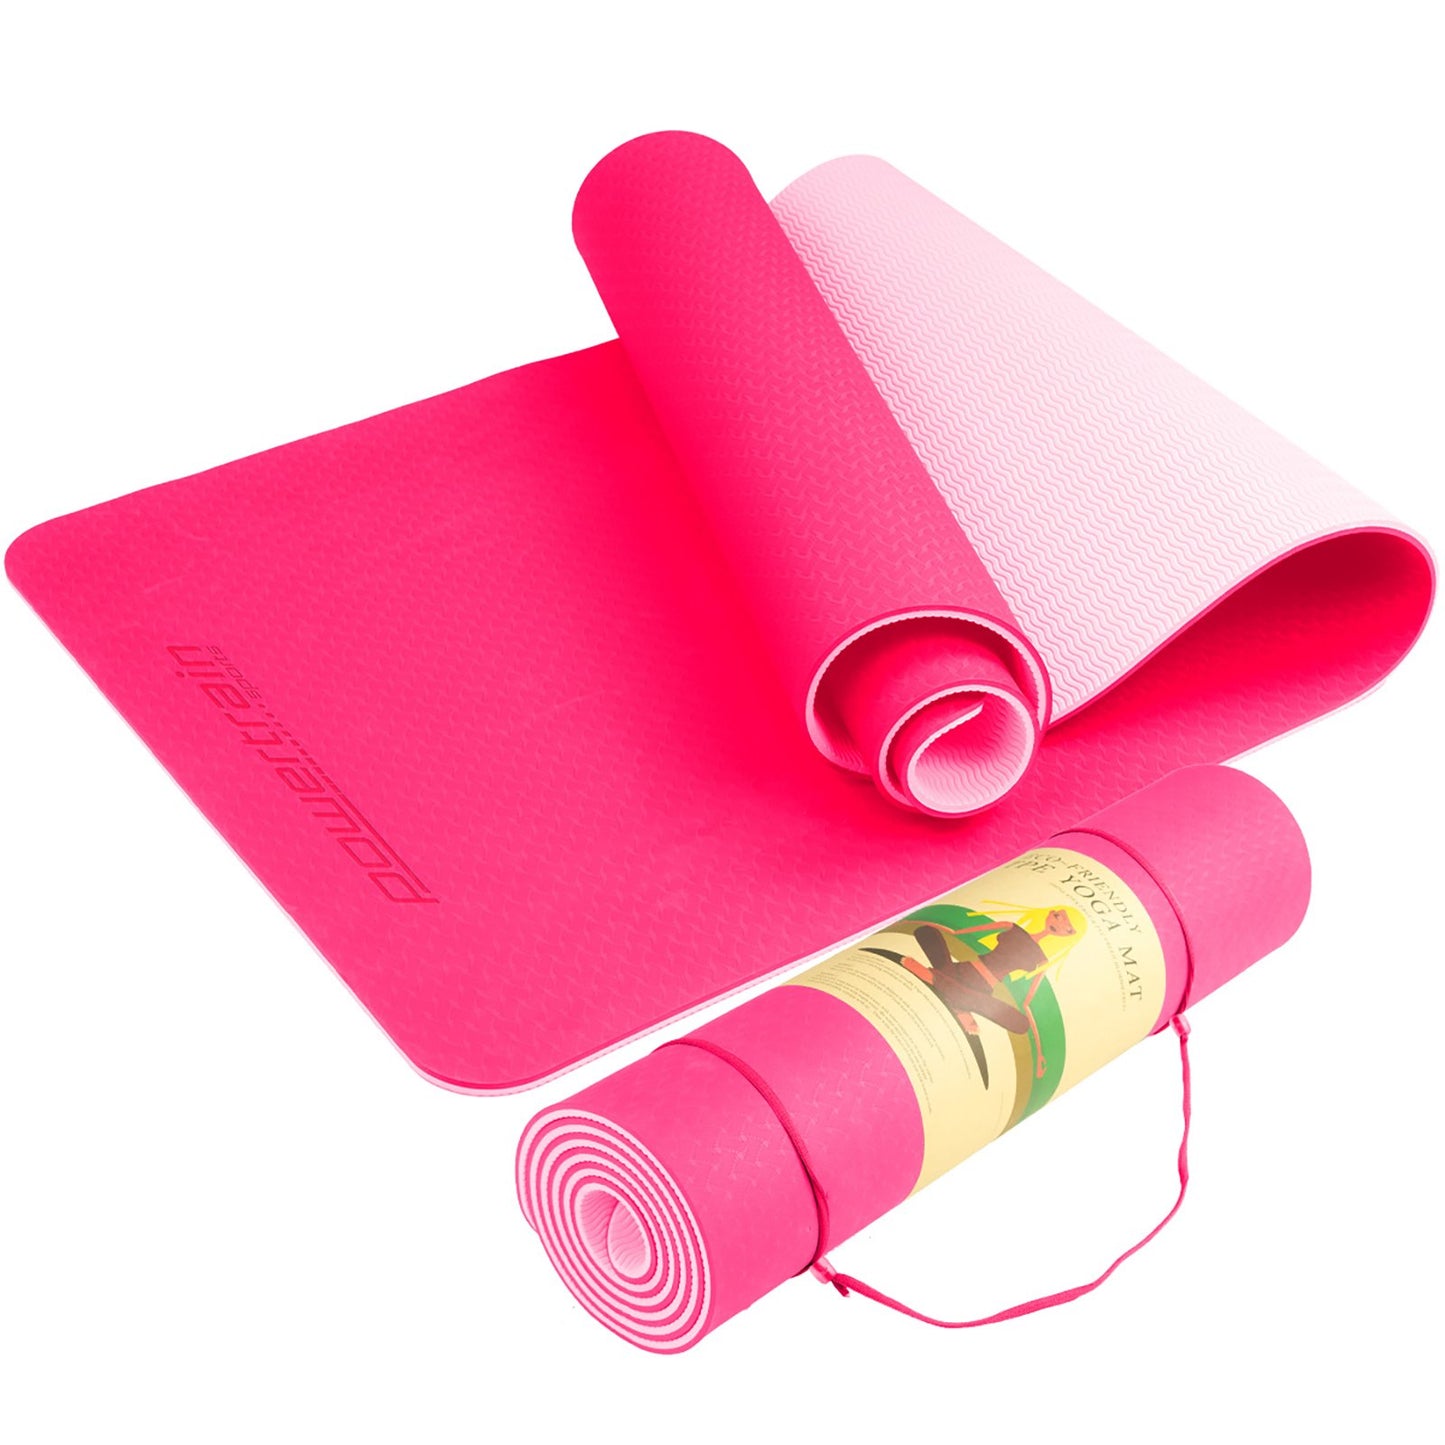 Powertrain Eco-Friendly Dual Layer 8mm Yoga Mat | Hot Pink | Non-Slip Surface and Carry Strap for Ultimate Comfort and Portability